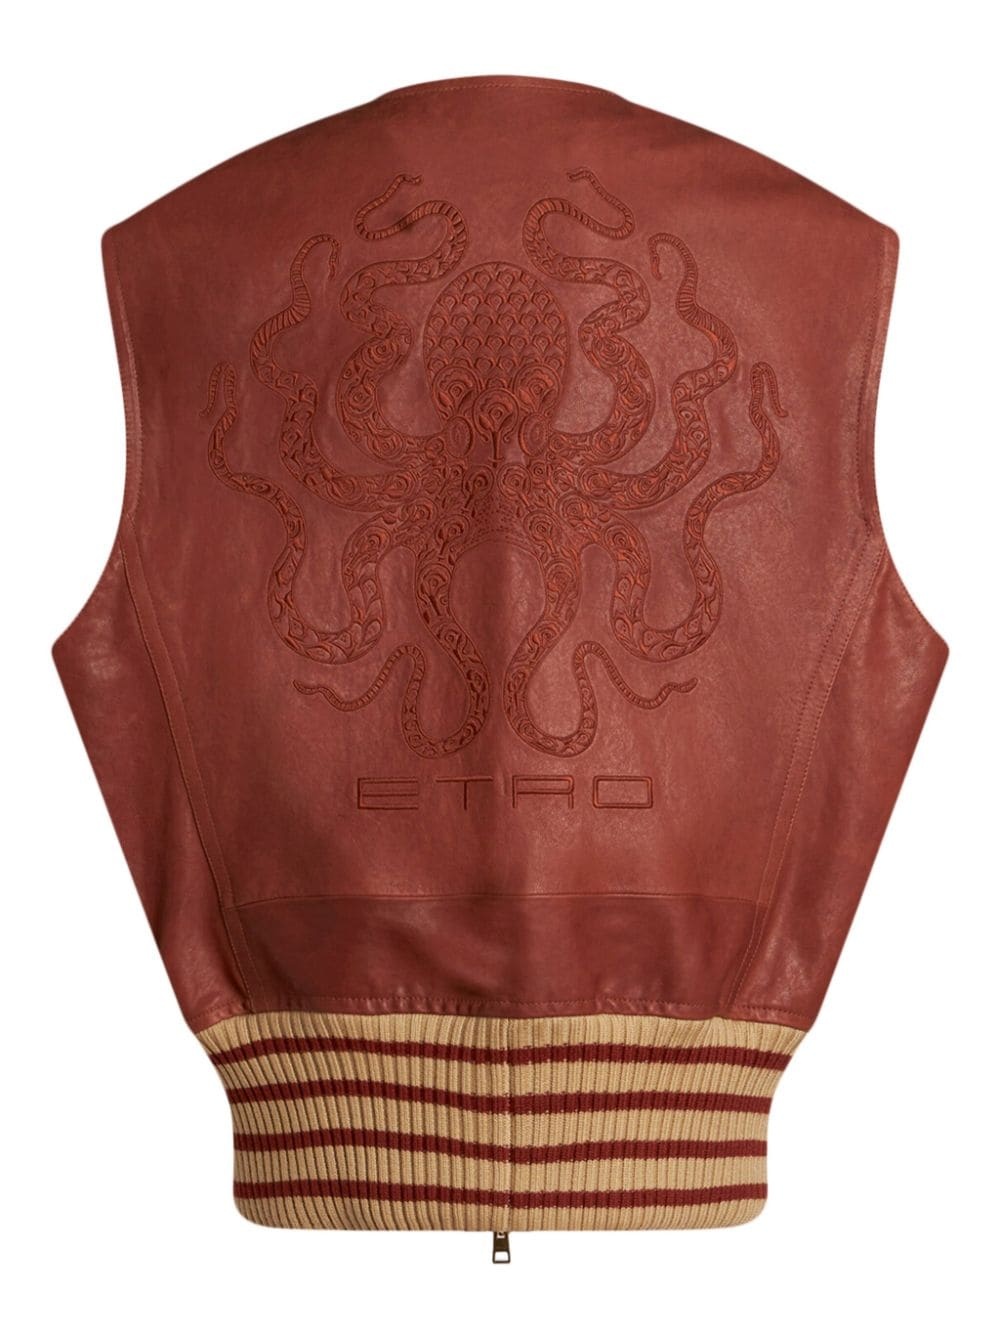 octopus-embroidered leather waist coat - 7